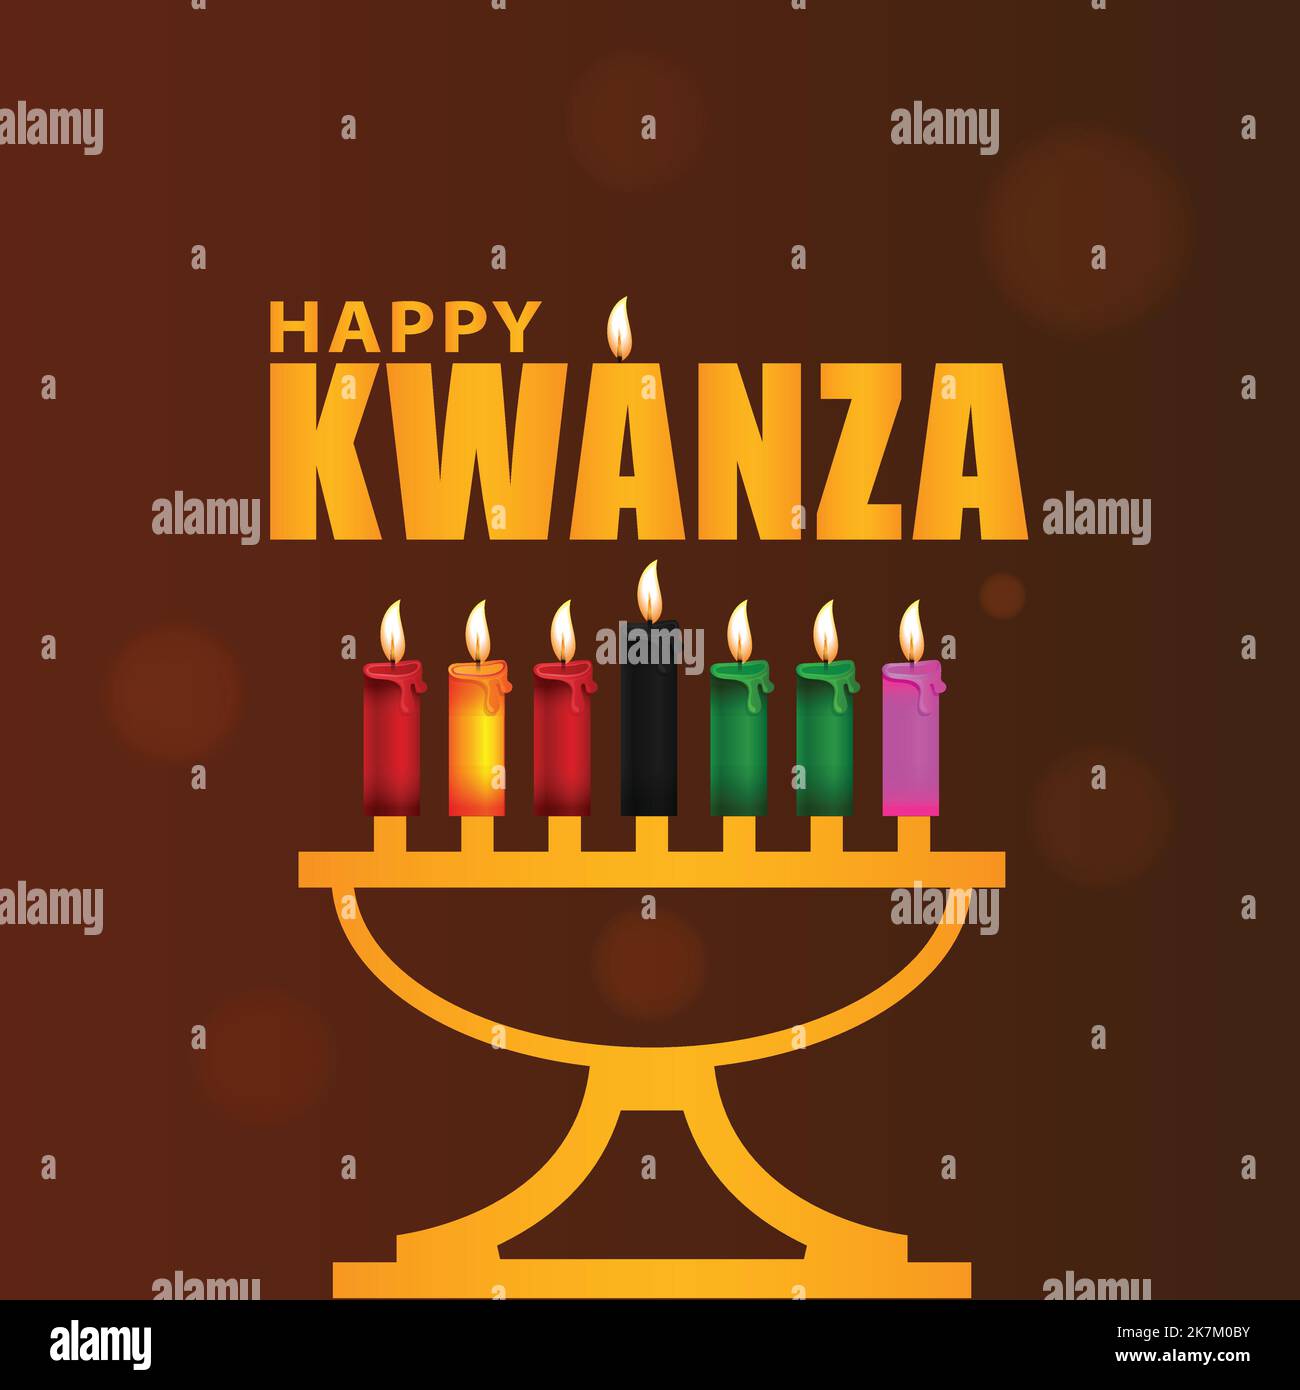 happy kwanza holiday greeting card, kwanza celebration design with seven candles vector illustration. Stock Vector